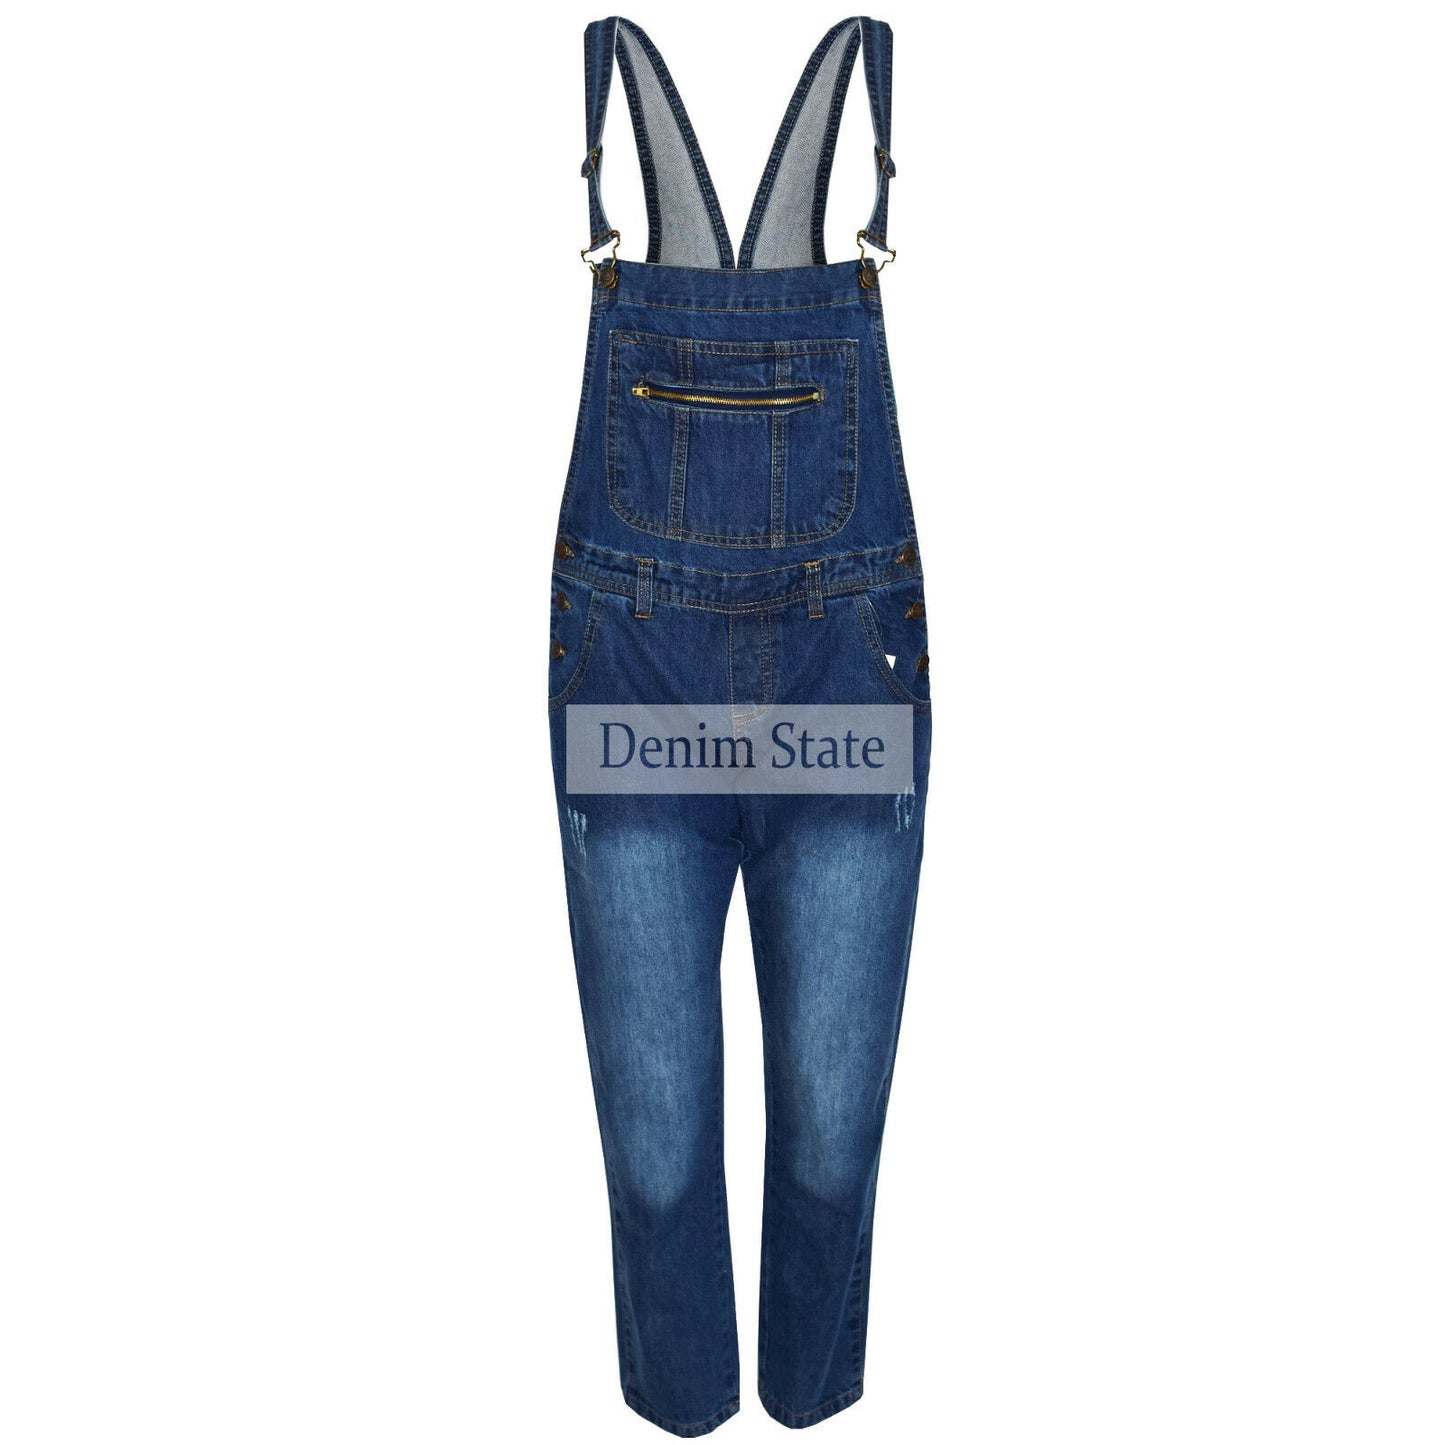 Ladies Dark Long Length Dungaree's. These Have A Zip Pocket At The Front And Side Pockets. Sizes 8-22 Available. The Straps Are Adjustable Also.